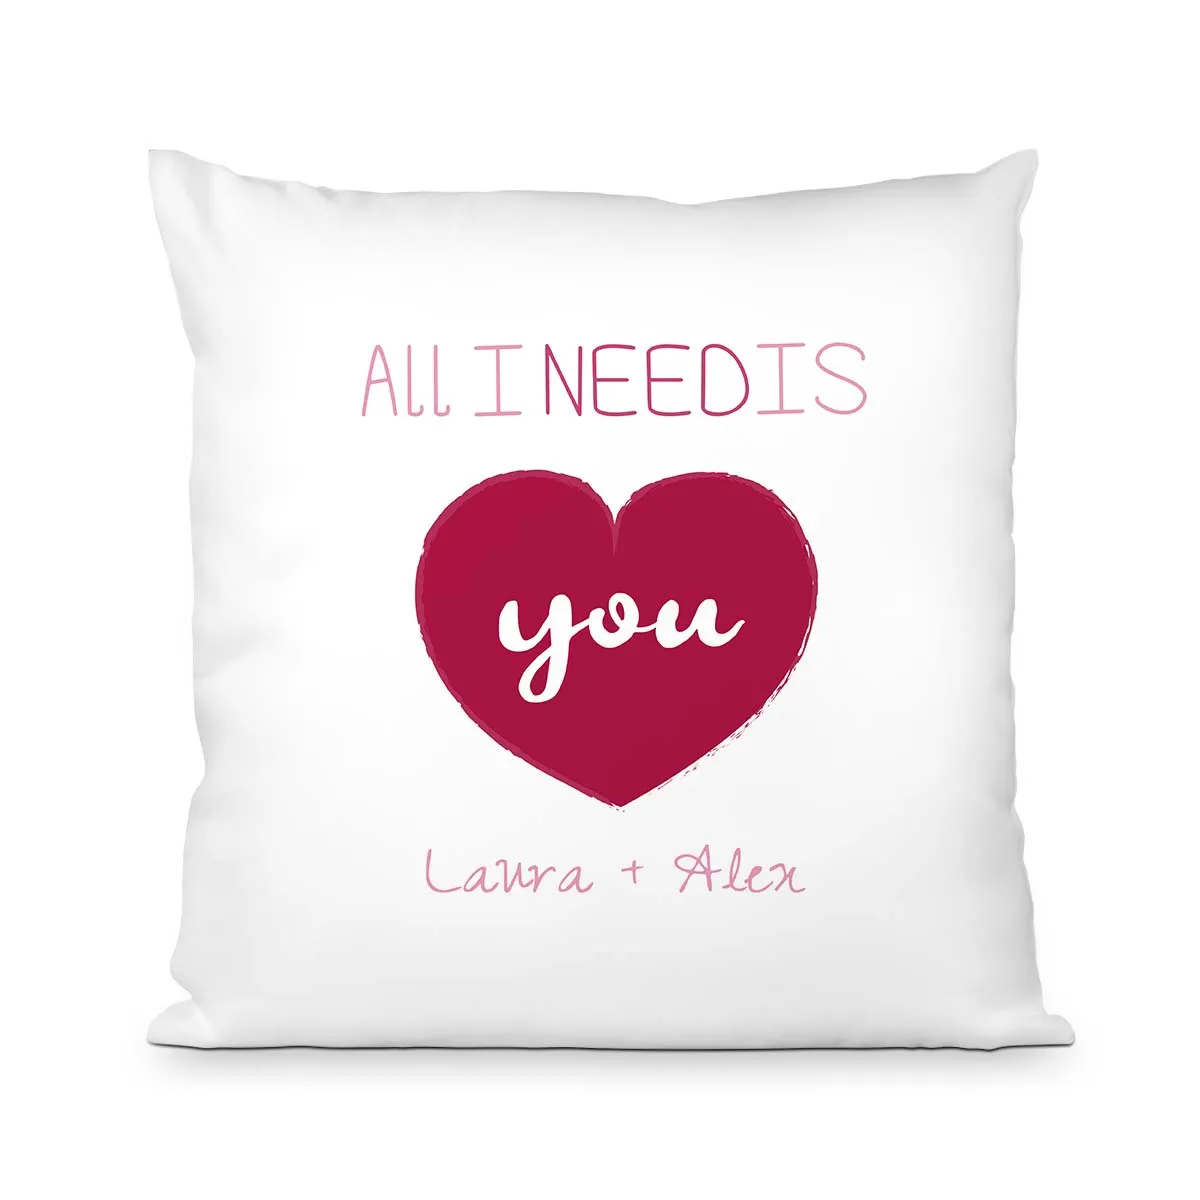 Personalisierbares Kissen - All I Need Is You